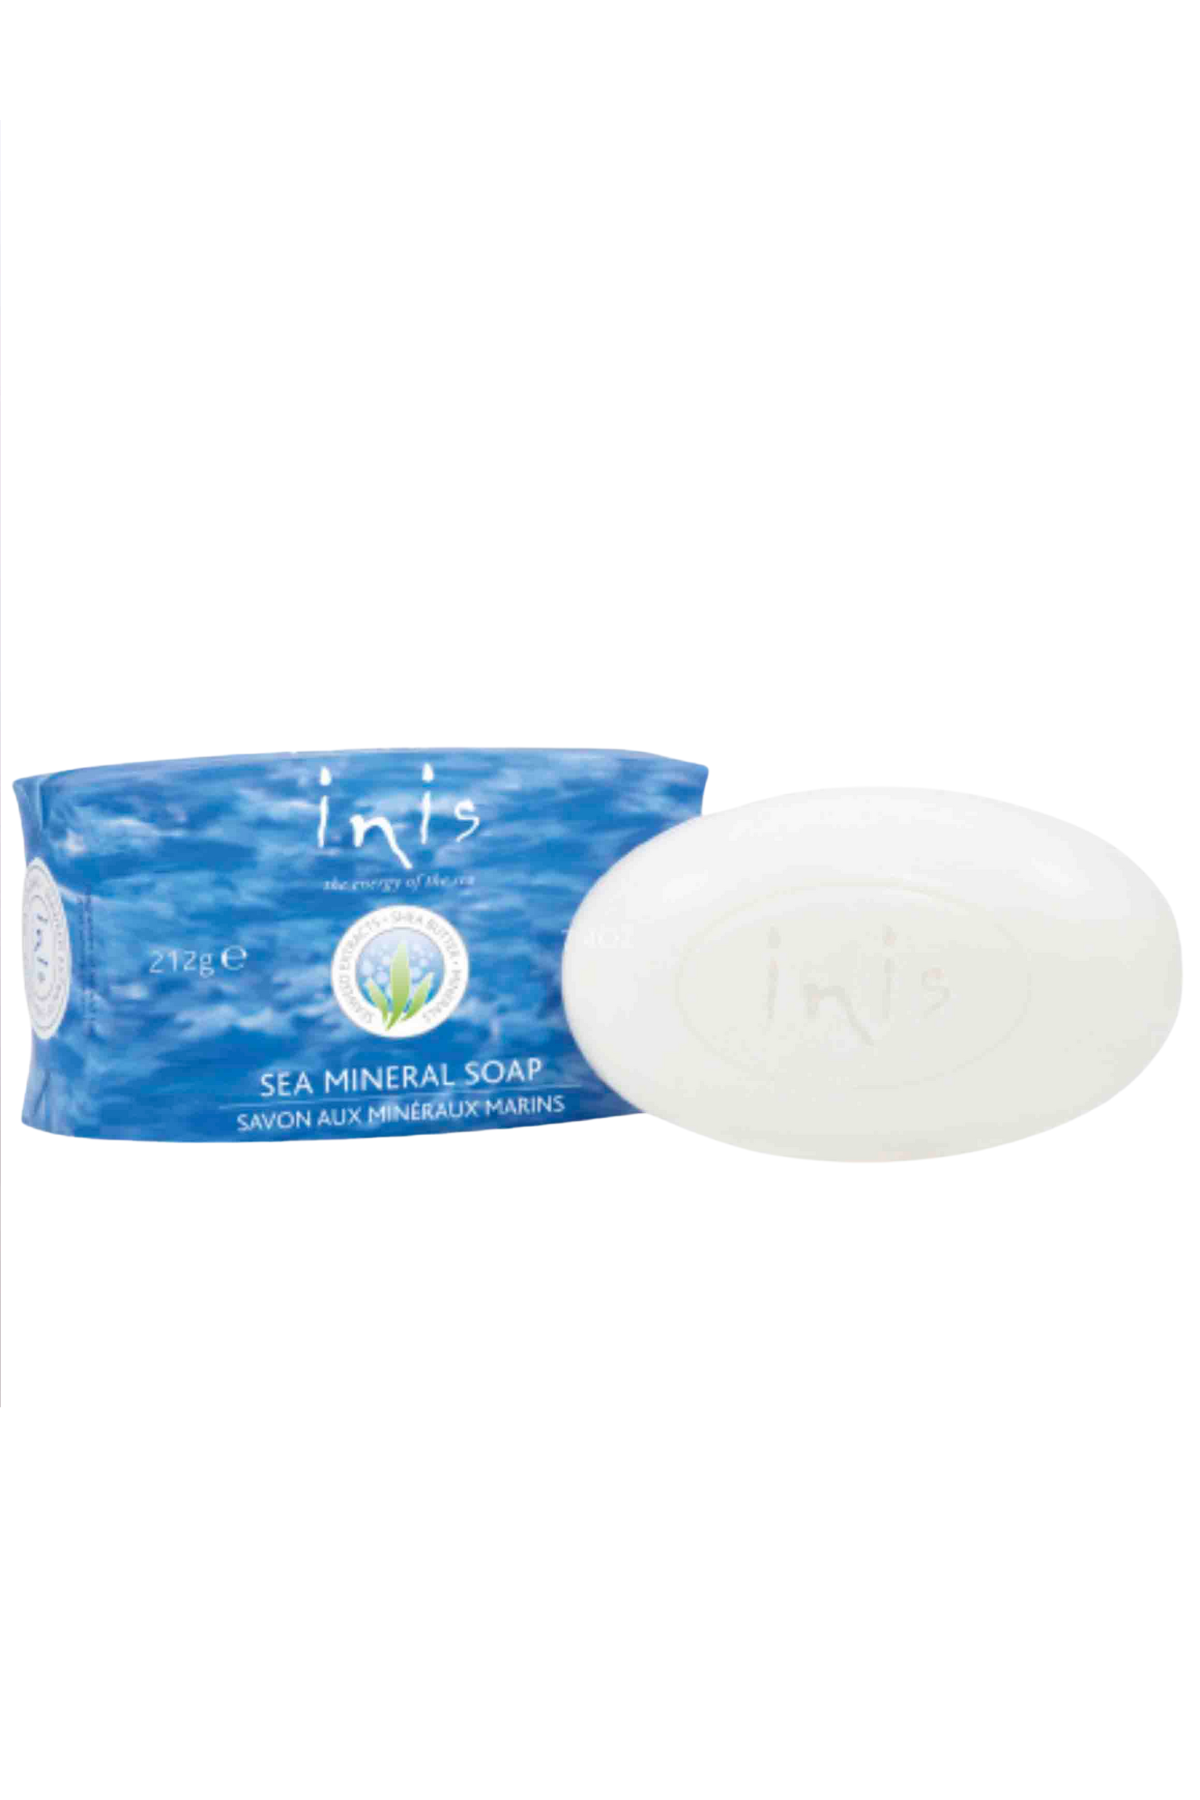 Large Bar Sea Mineral Soap by Inis